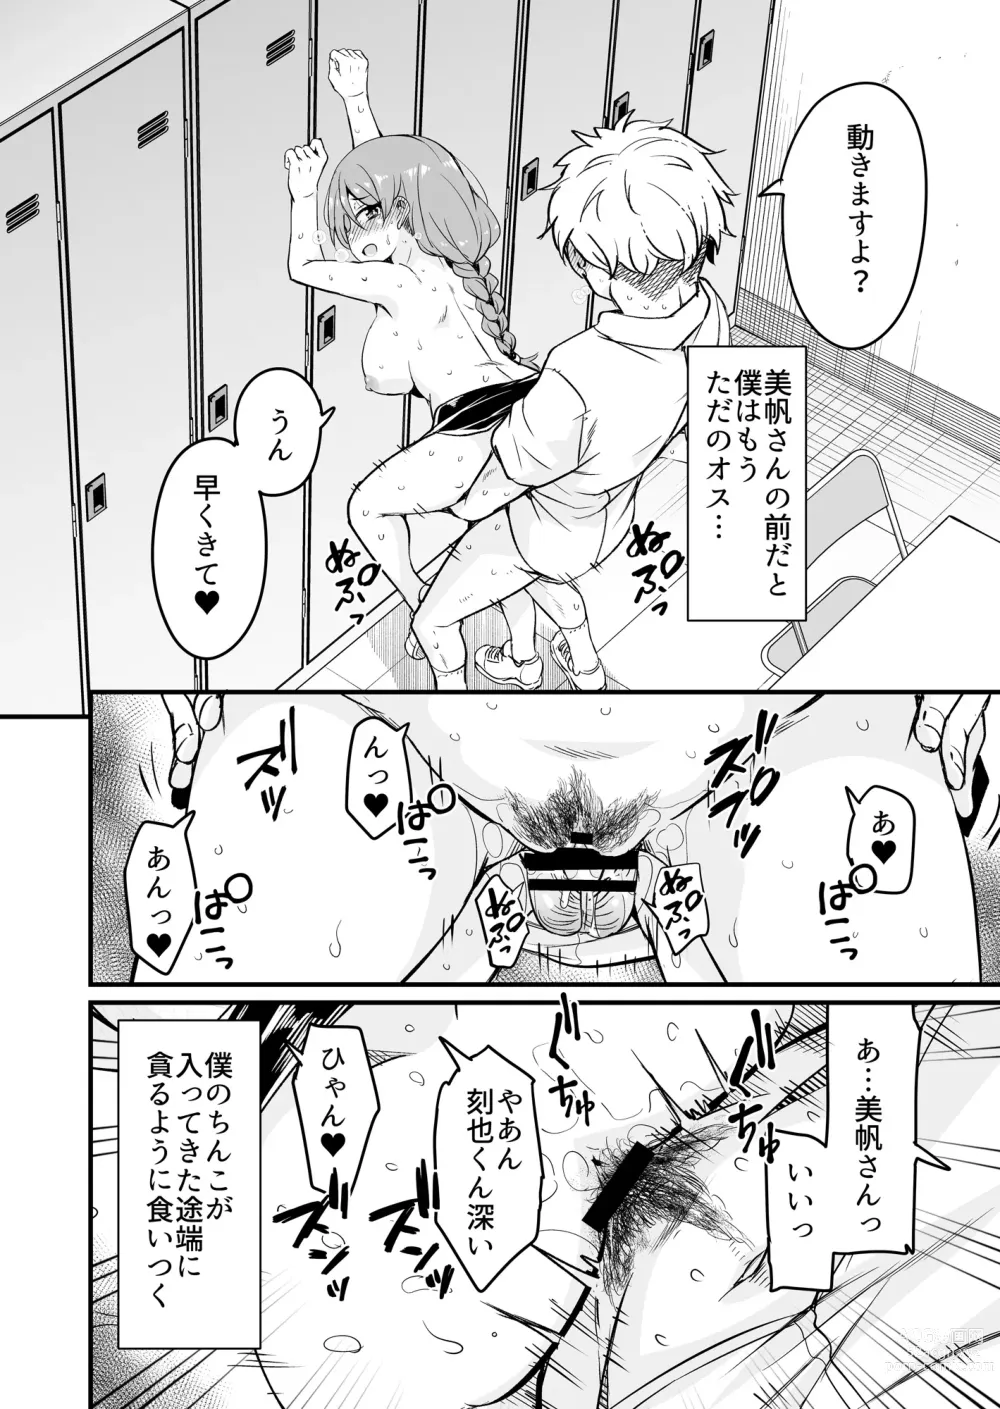 Page 18 of doujinshi 人妻店長〜娘の彼氏お借りします〜